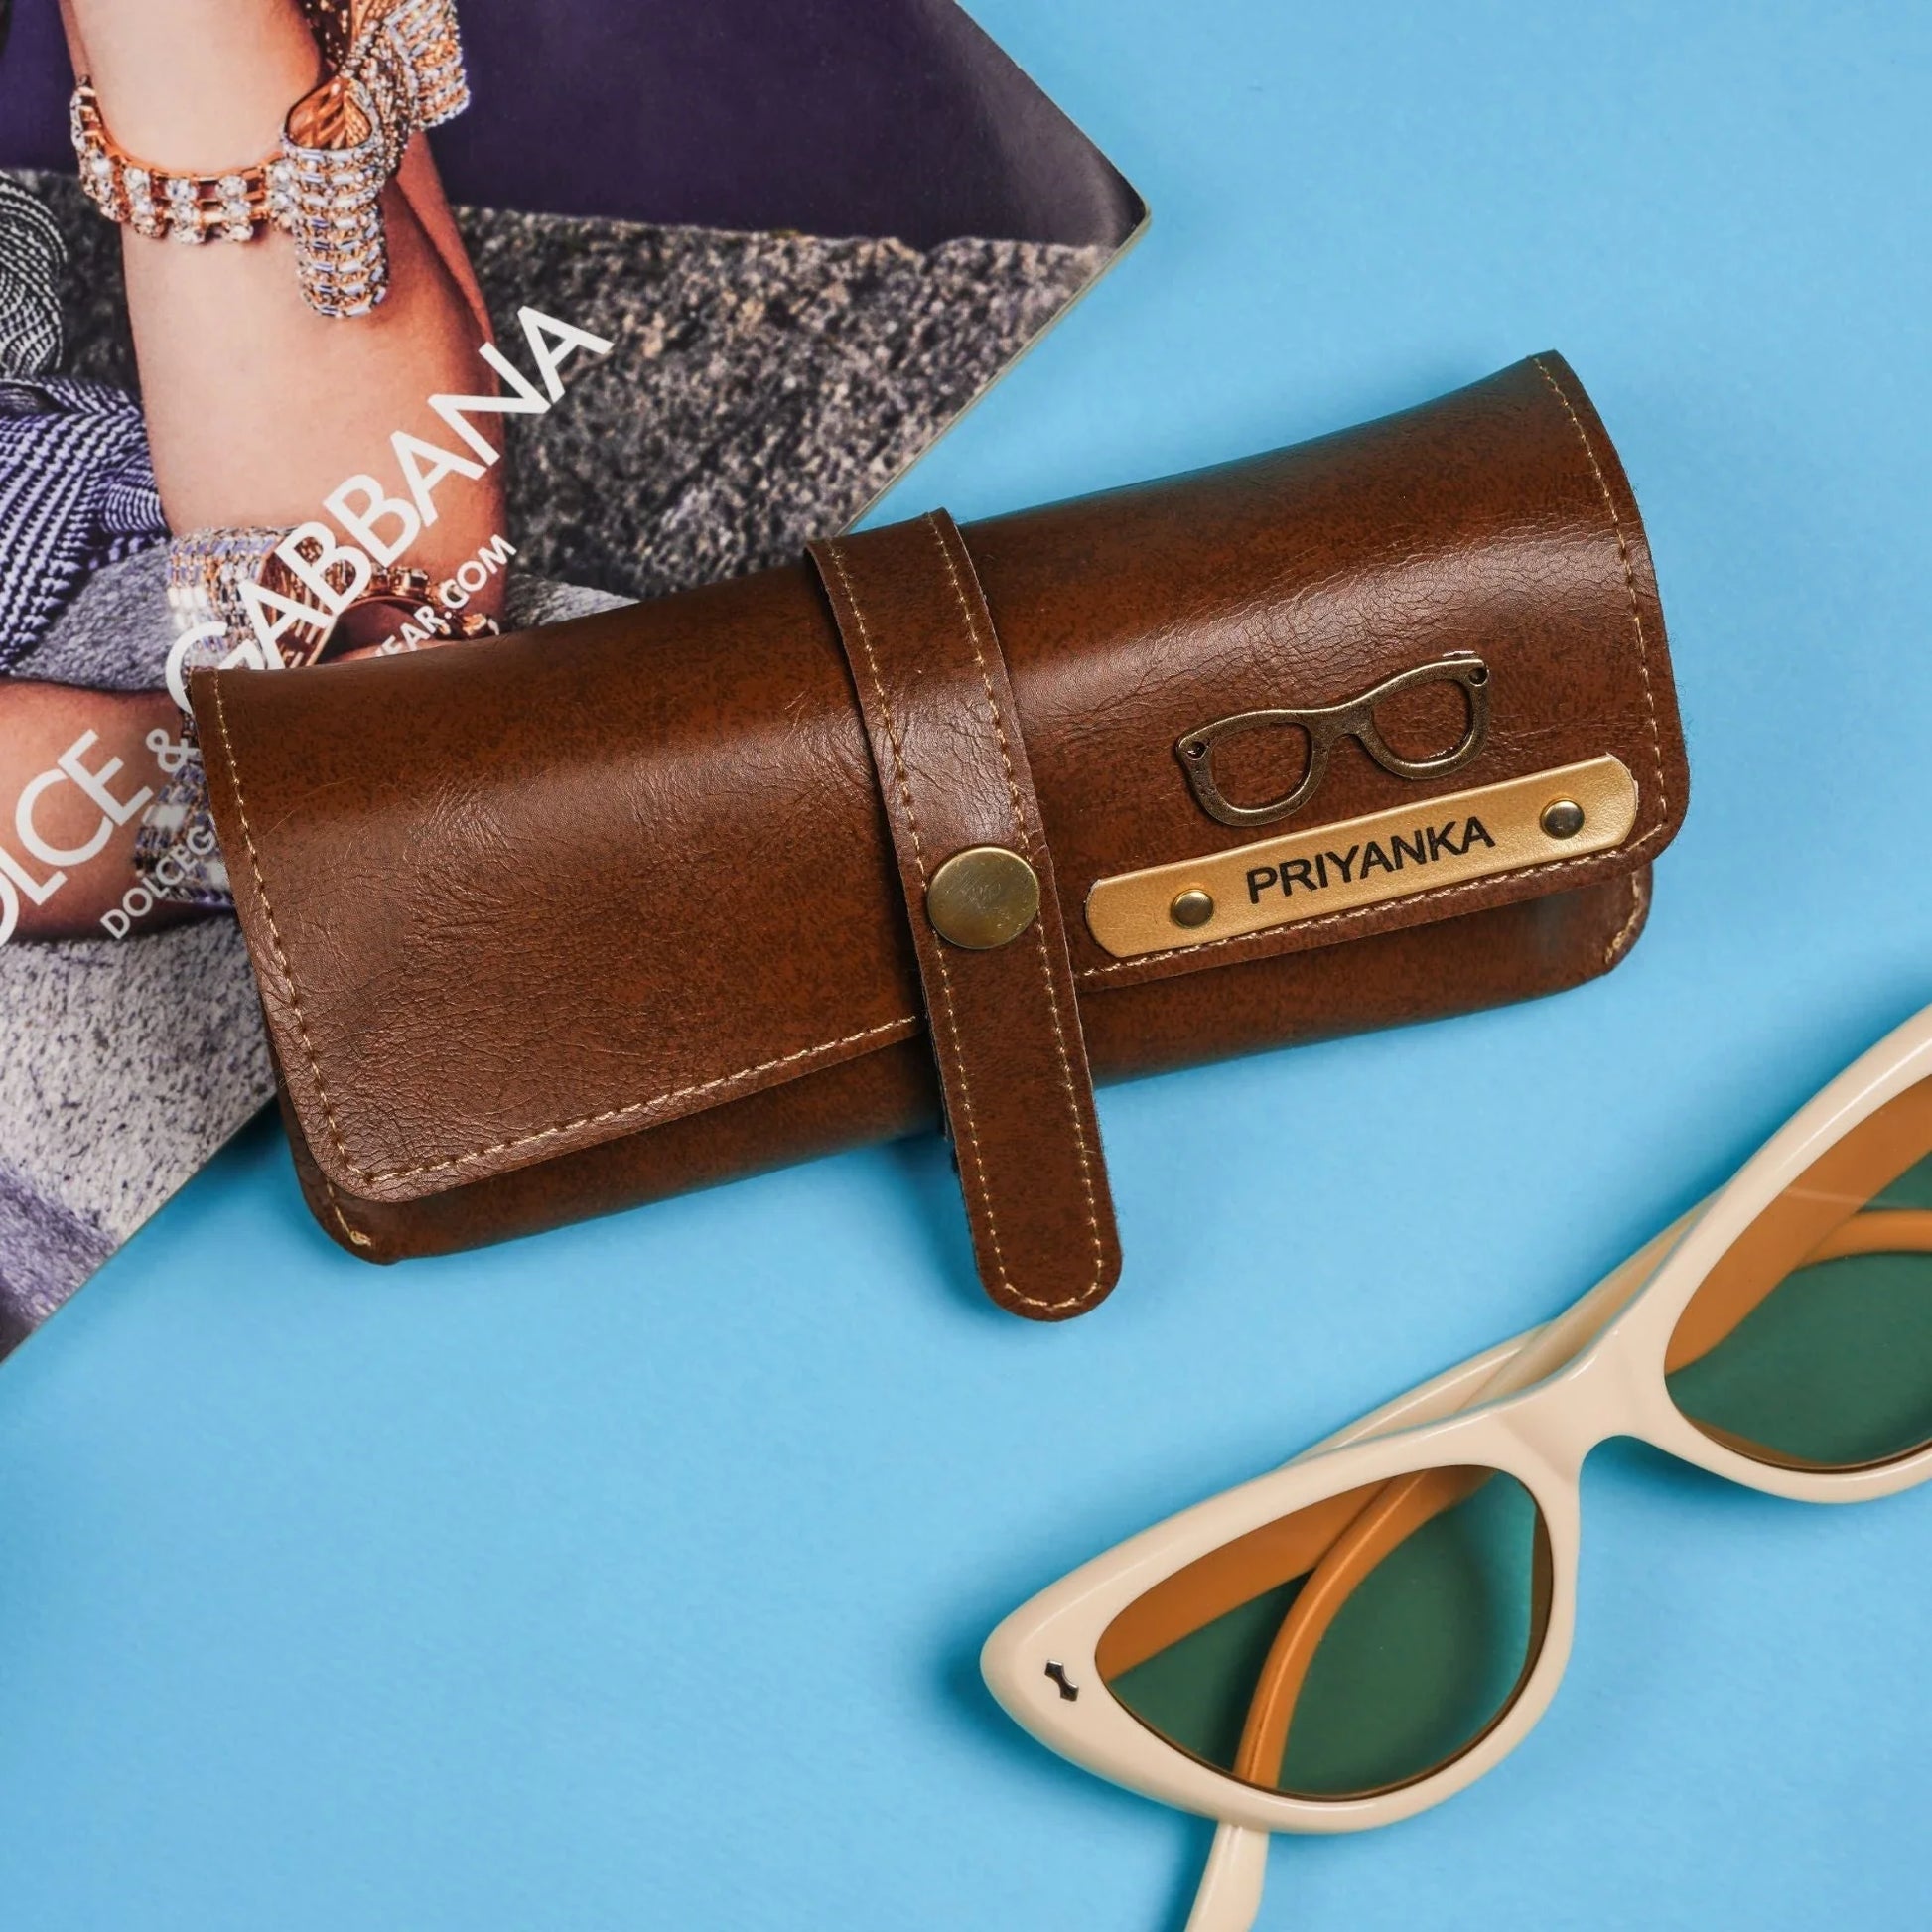 Elevate your everyday carry with our custom sunglasses case! This case is made from high-quality materials and features a sleek, modern design, making it the perfect choice for anyone looking for a stylish and practical accessory.